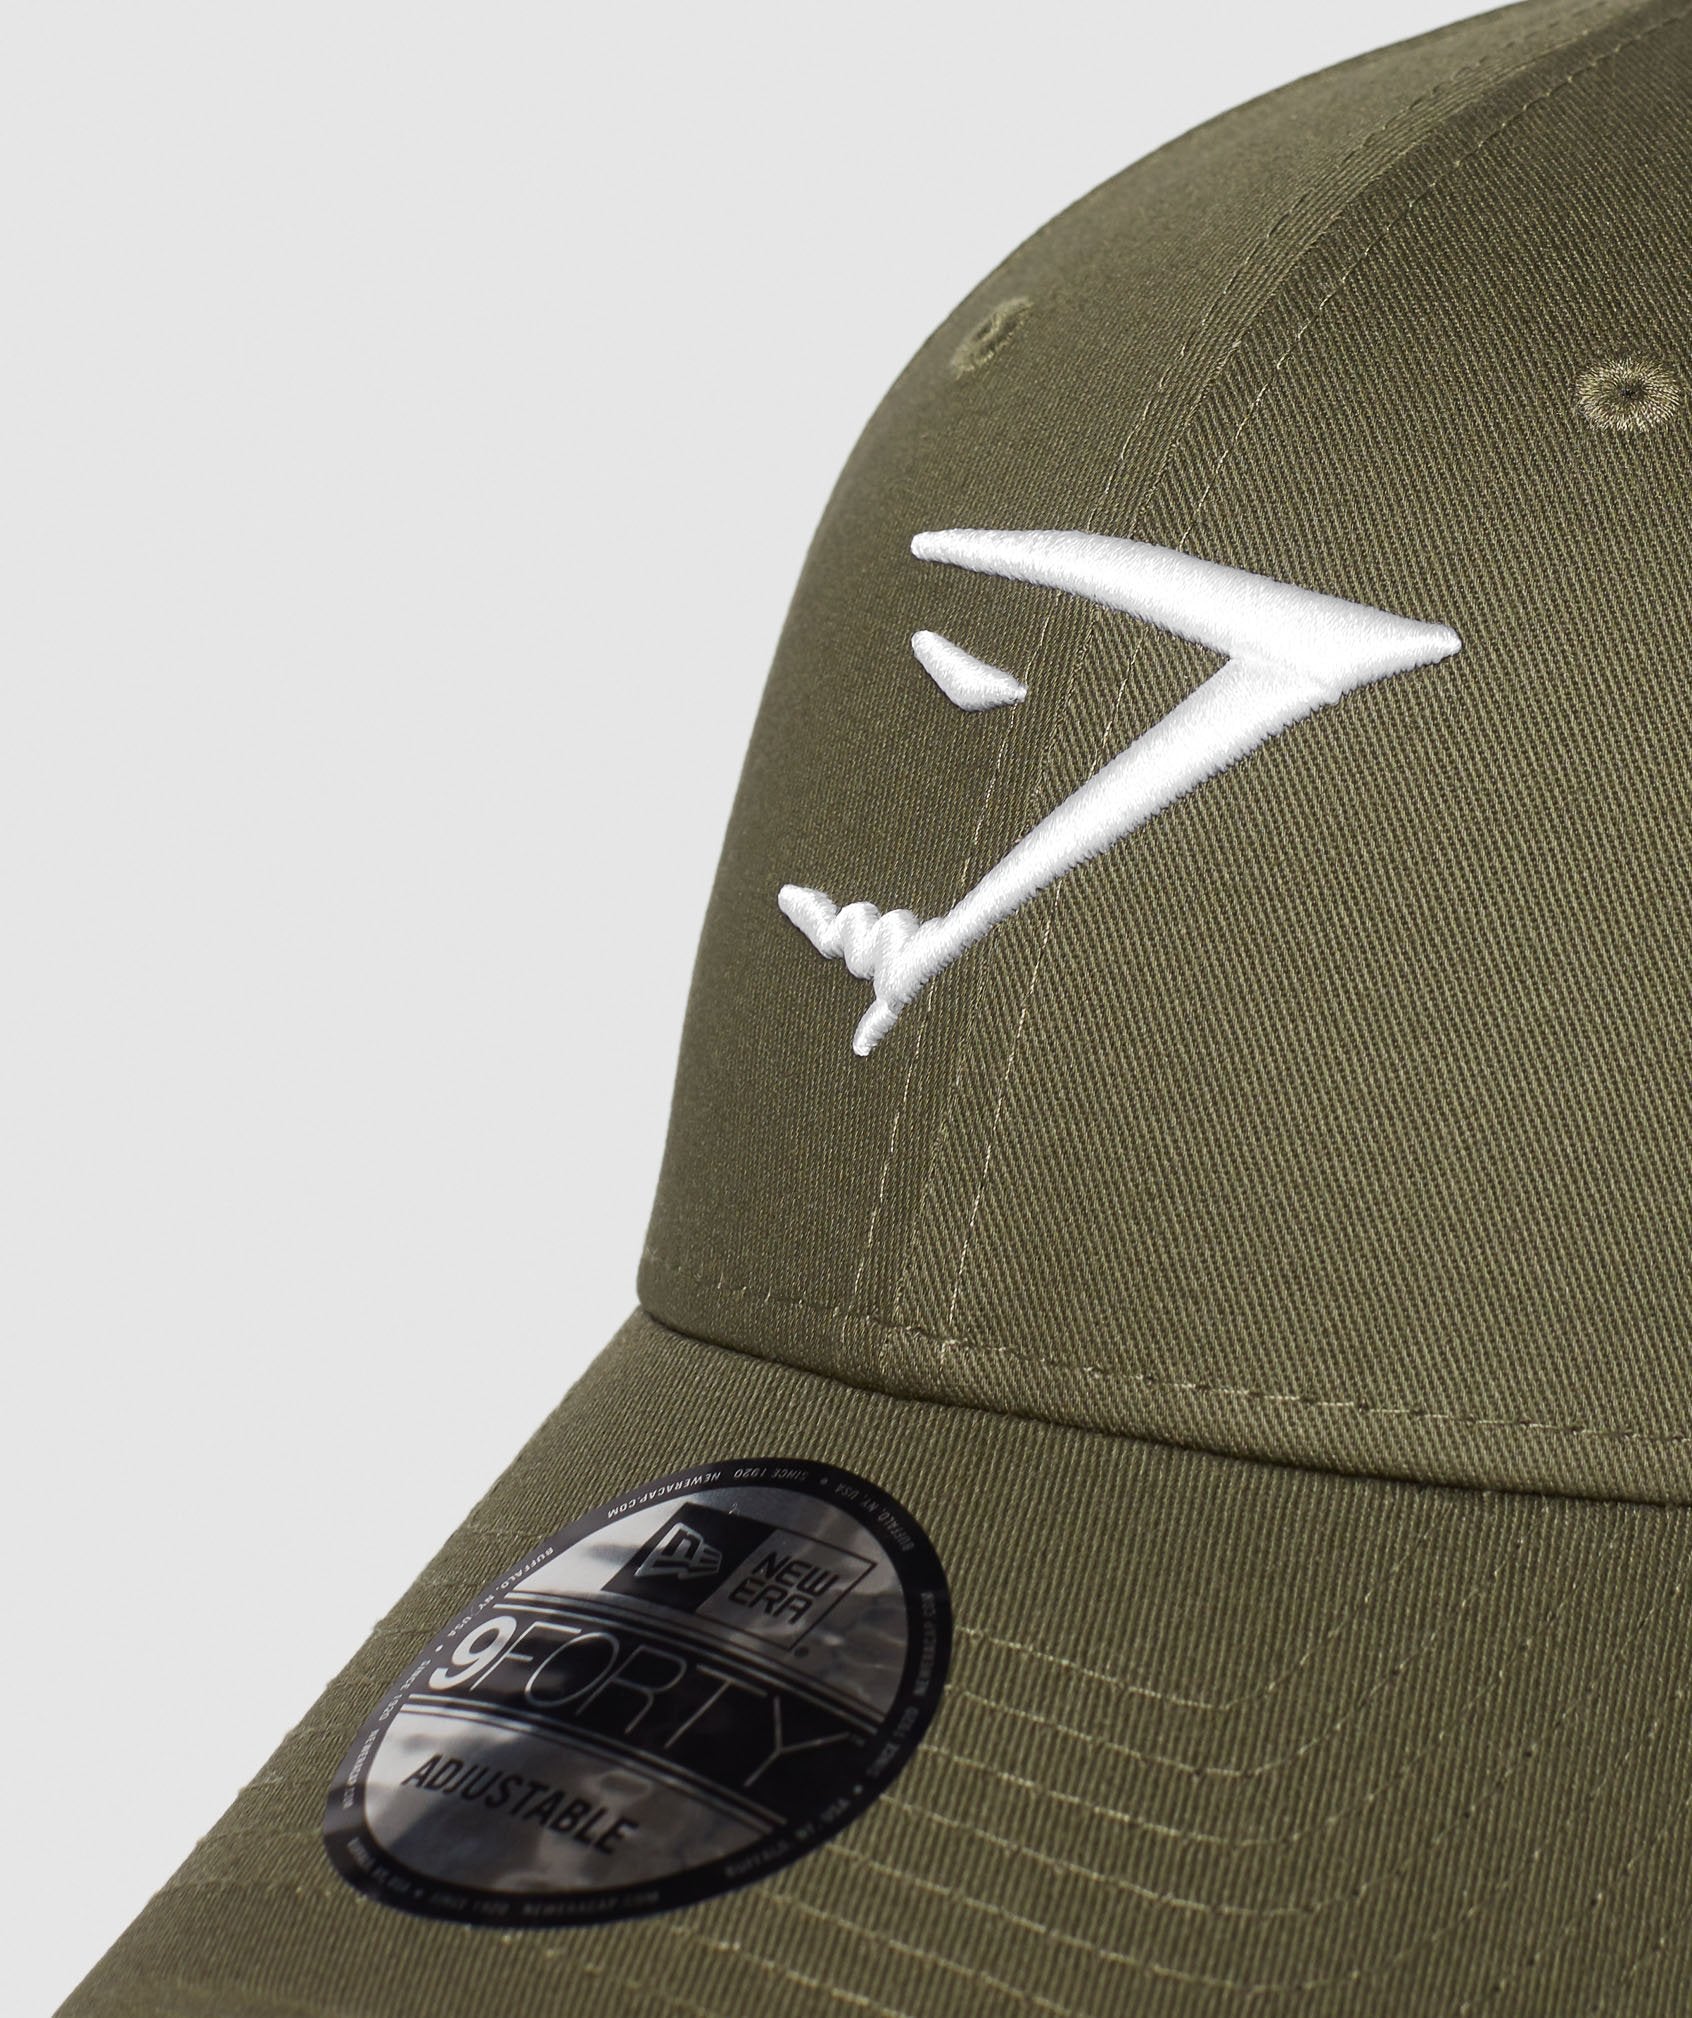 New Era 9FORTY Adjustable in Khaki - view 3